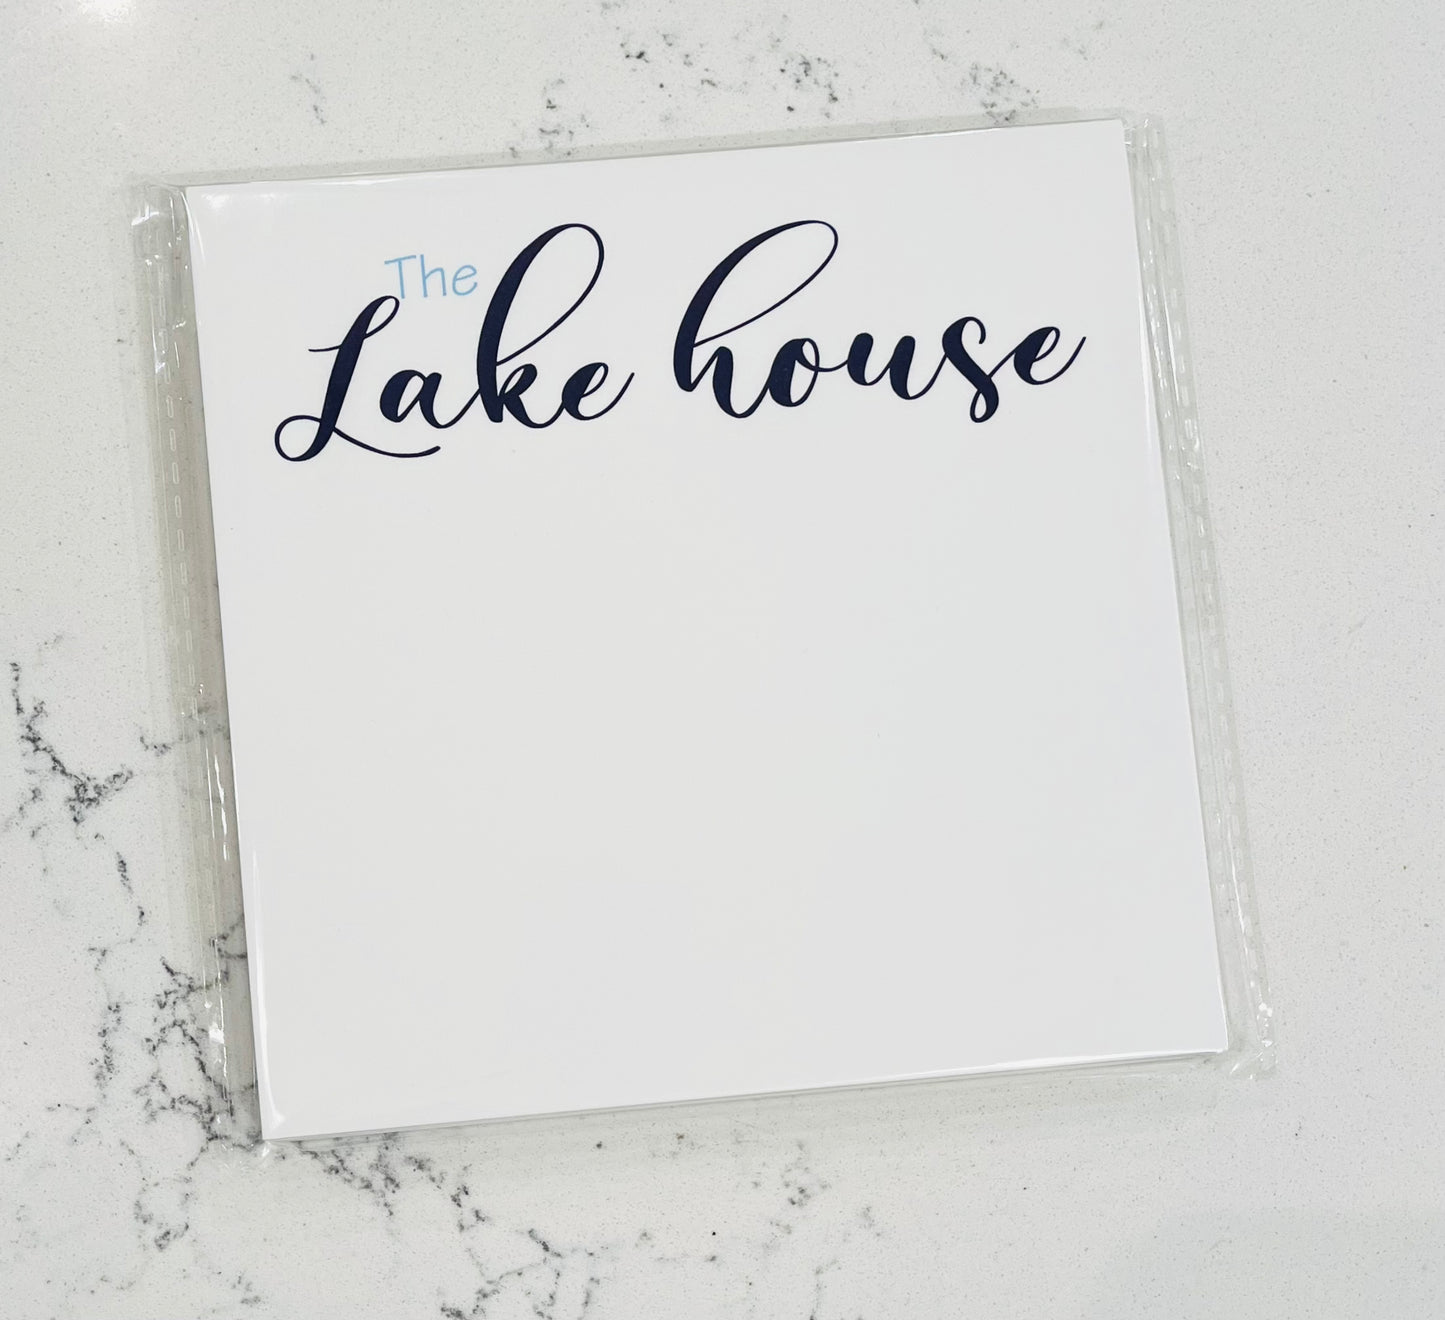 Notepad, the Lake house